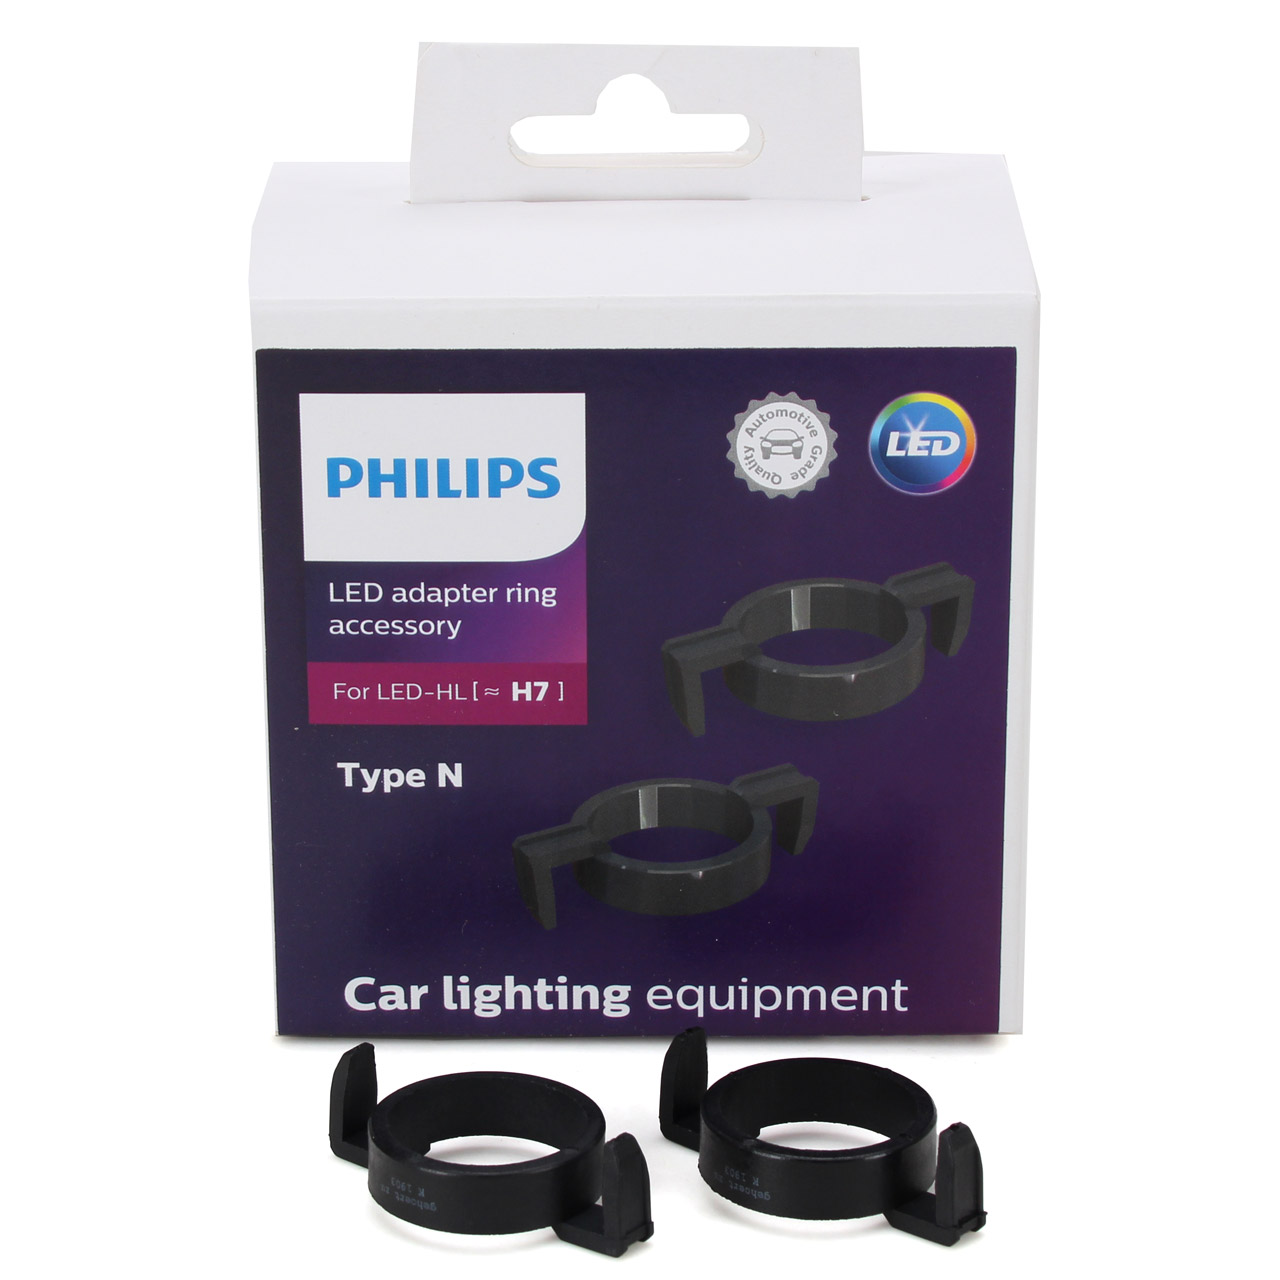 PHILIPS 11183X2 Adapterringe Lampenfassung H7 LED Typ N PX26d